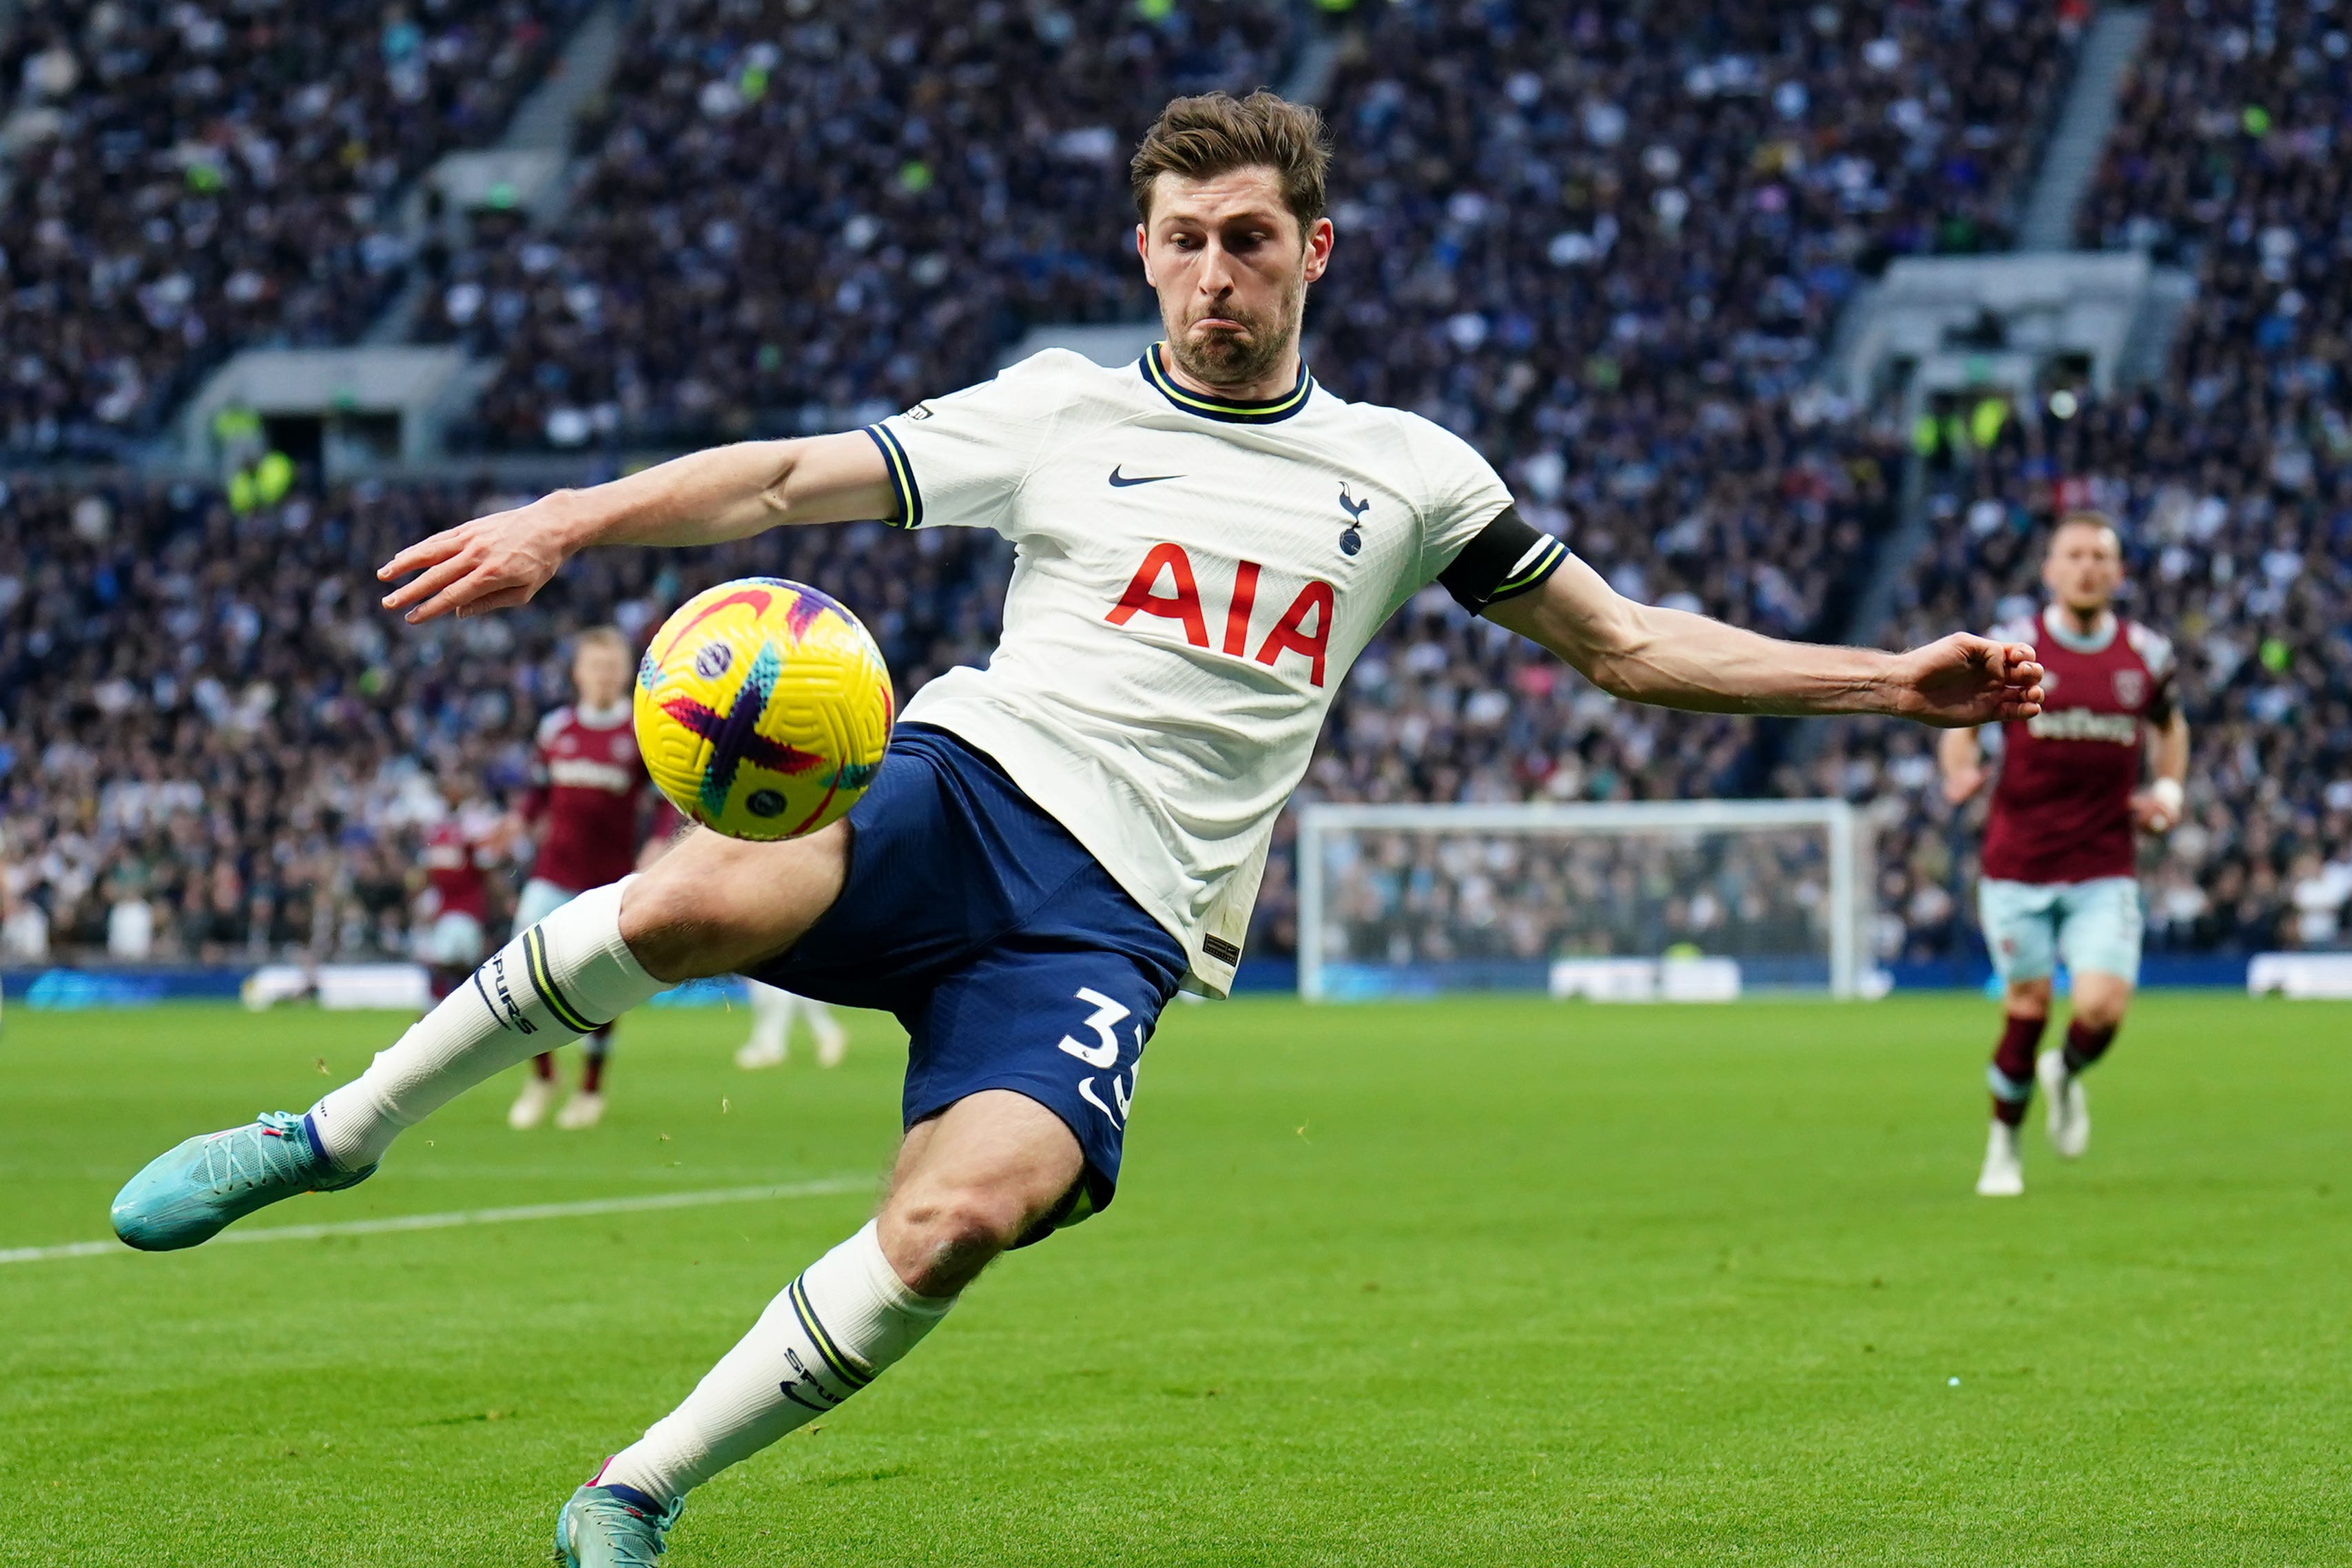 Ben Davies impressed at left wing-back for Tottenham in their 2-0 win over West Ham (Zac Goodwin/PA)